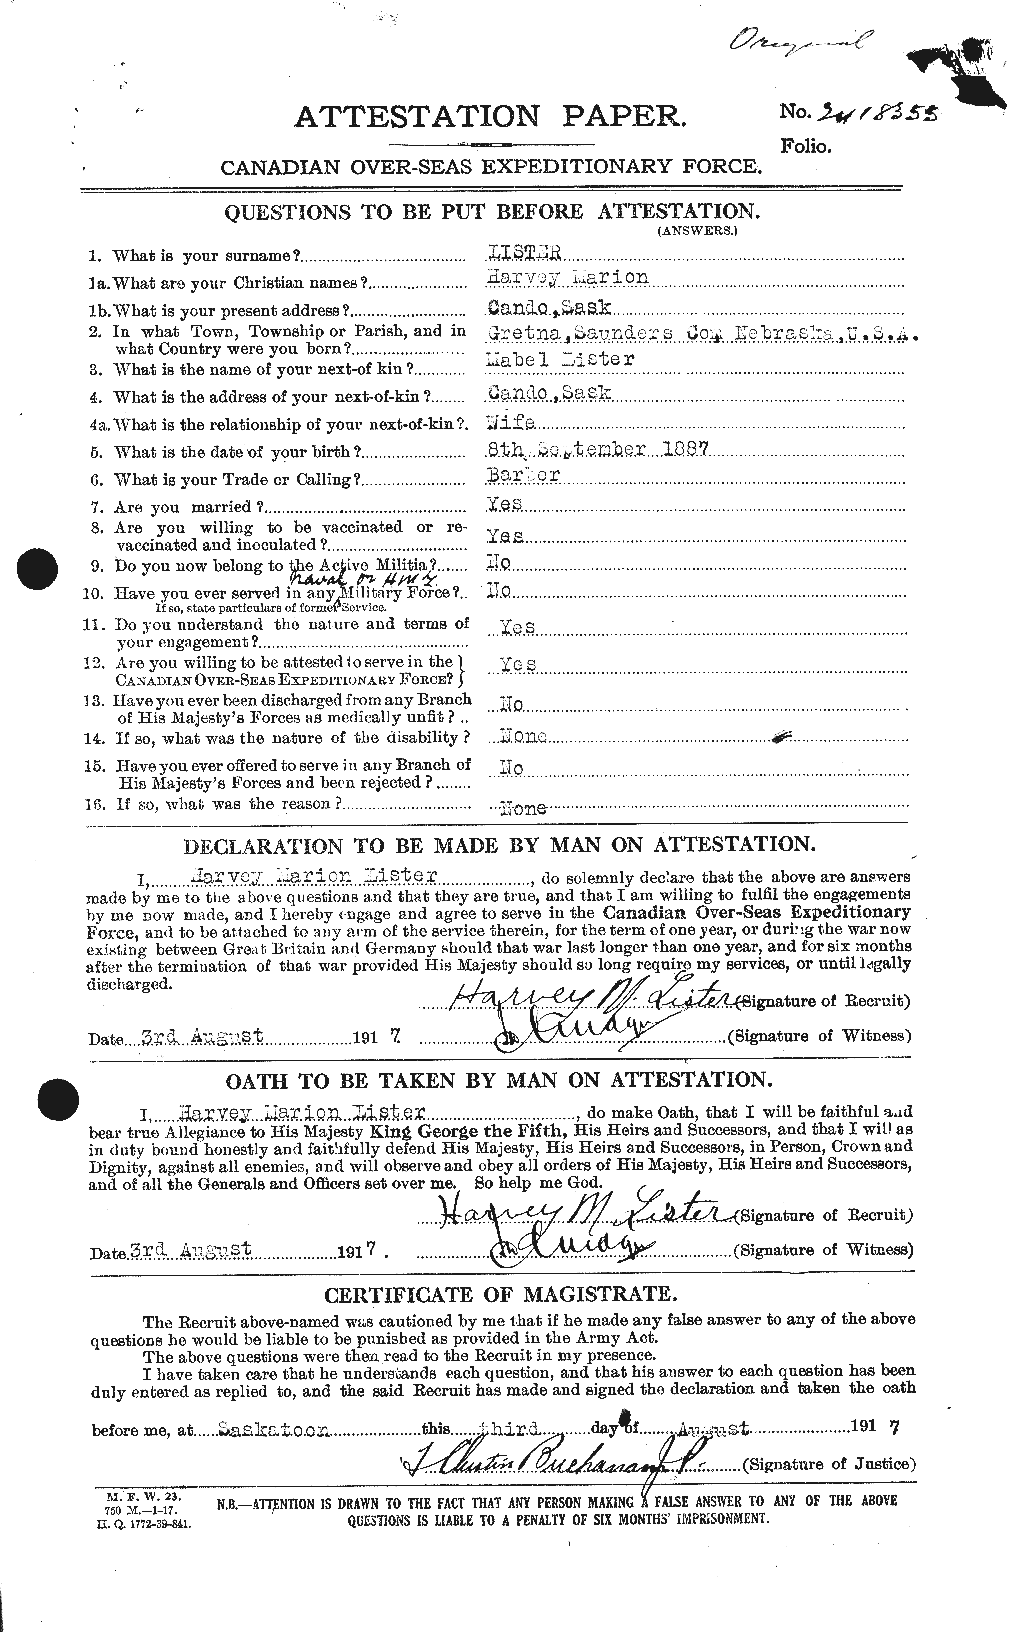 Personnel Records of the First World War - CEF 467021a